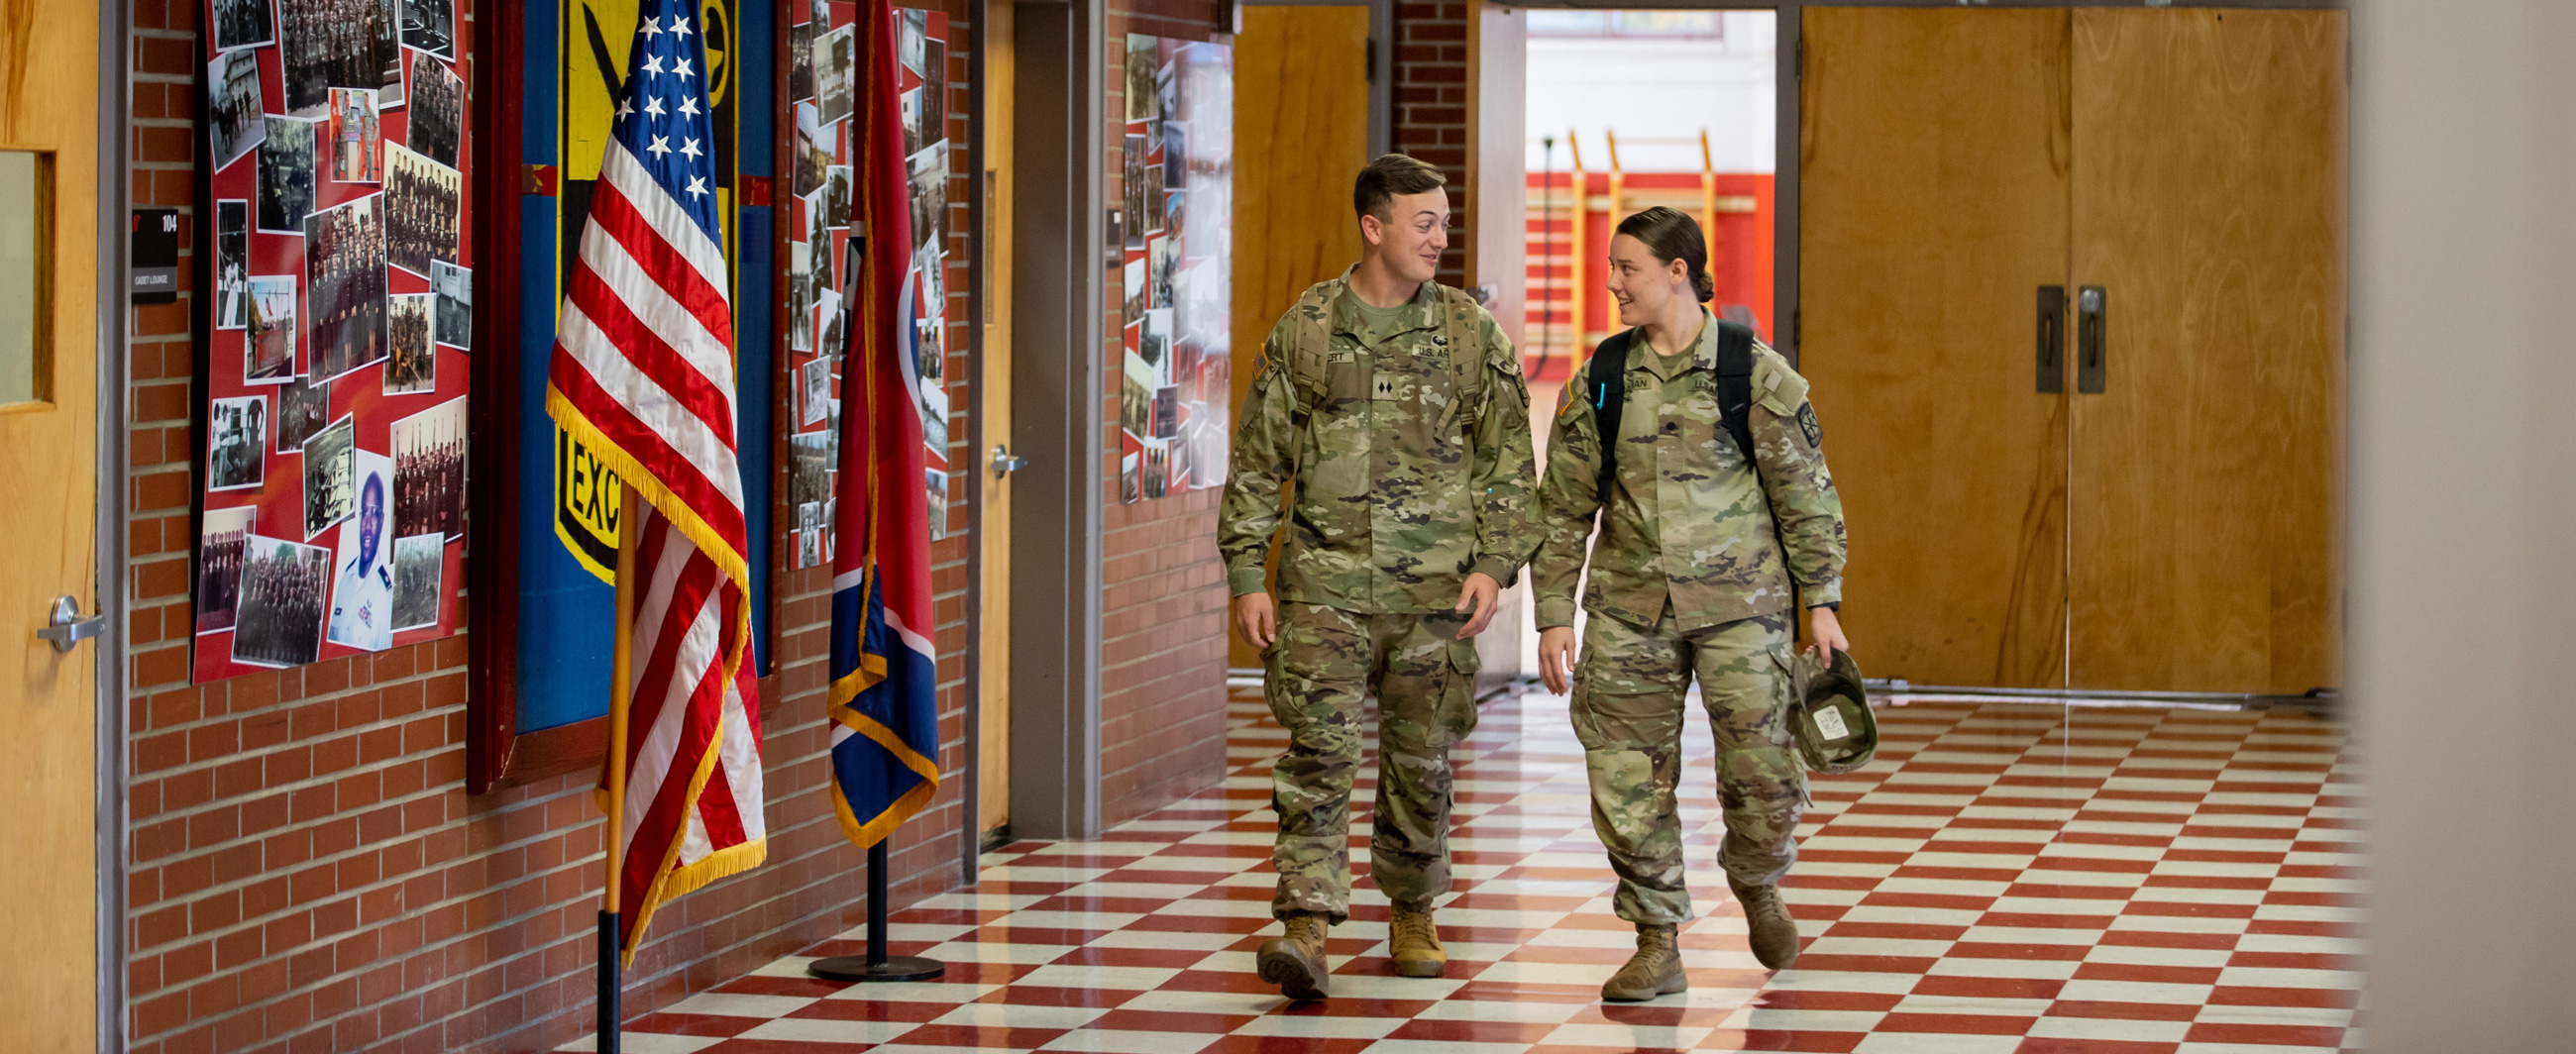 Military students walking down the hallway